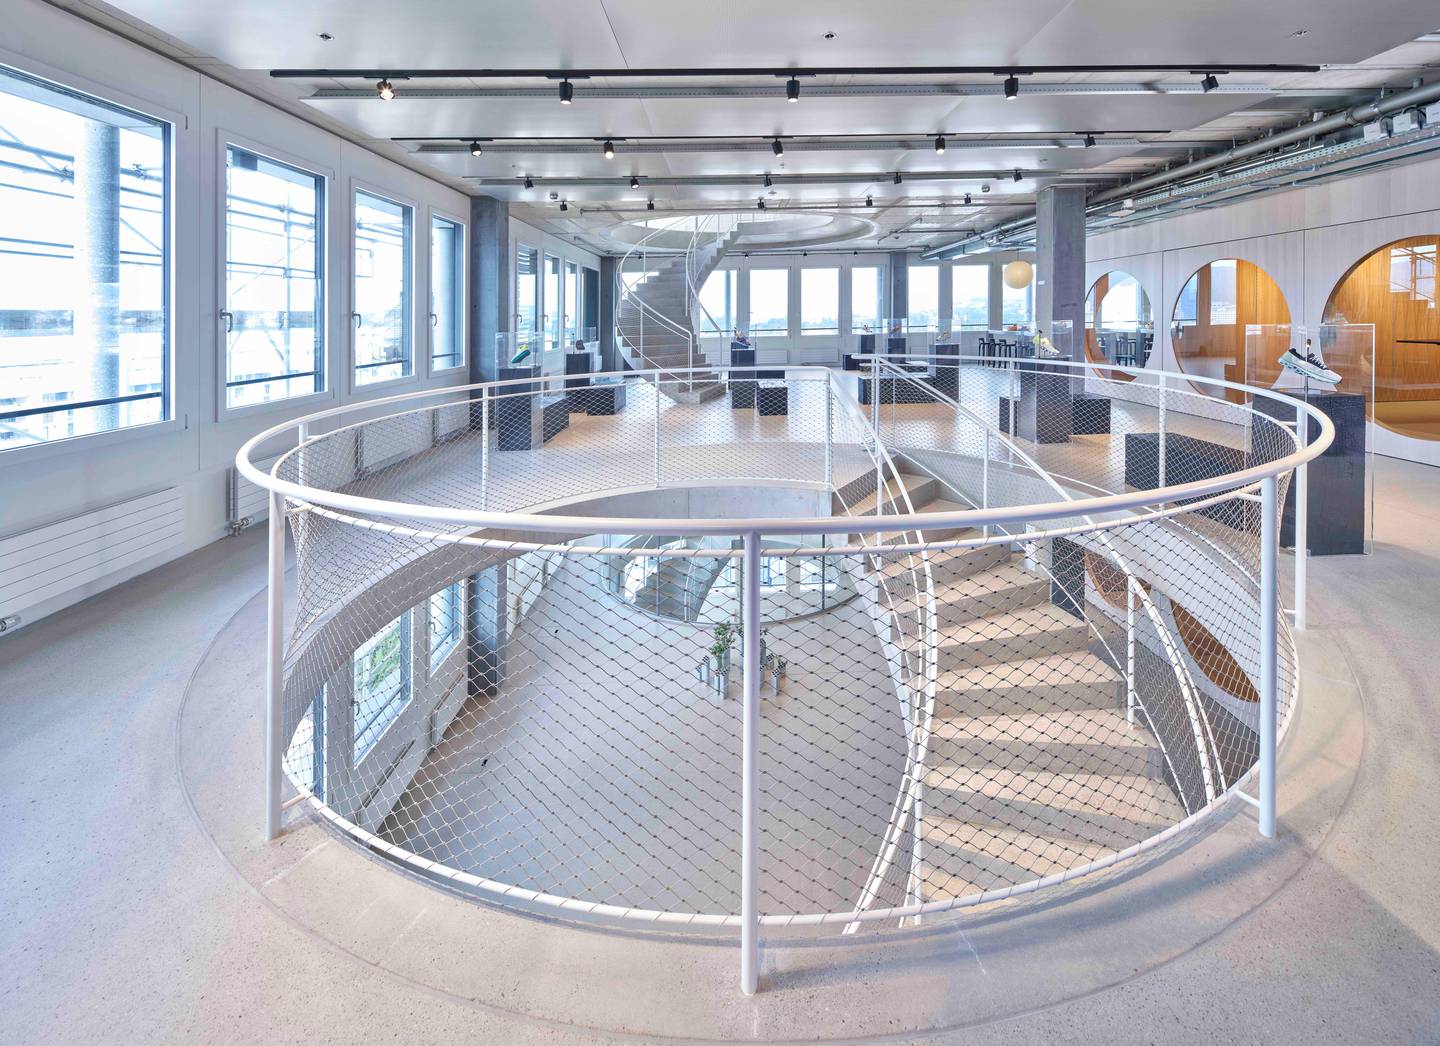 On, the running shoe brand based in Zurich, Switzerland, opened its new 17-storey office space this year, equipped with a central staircase called 